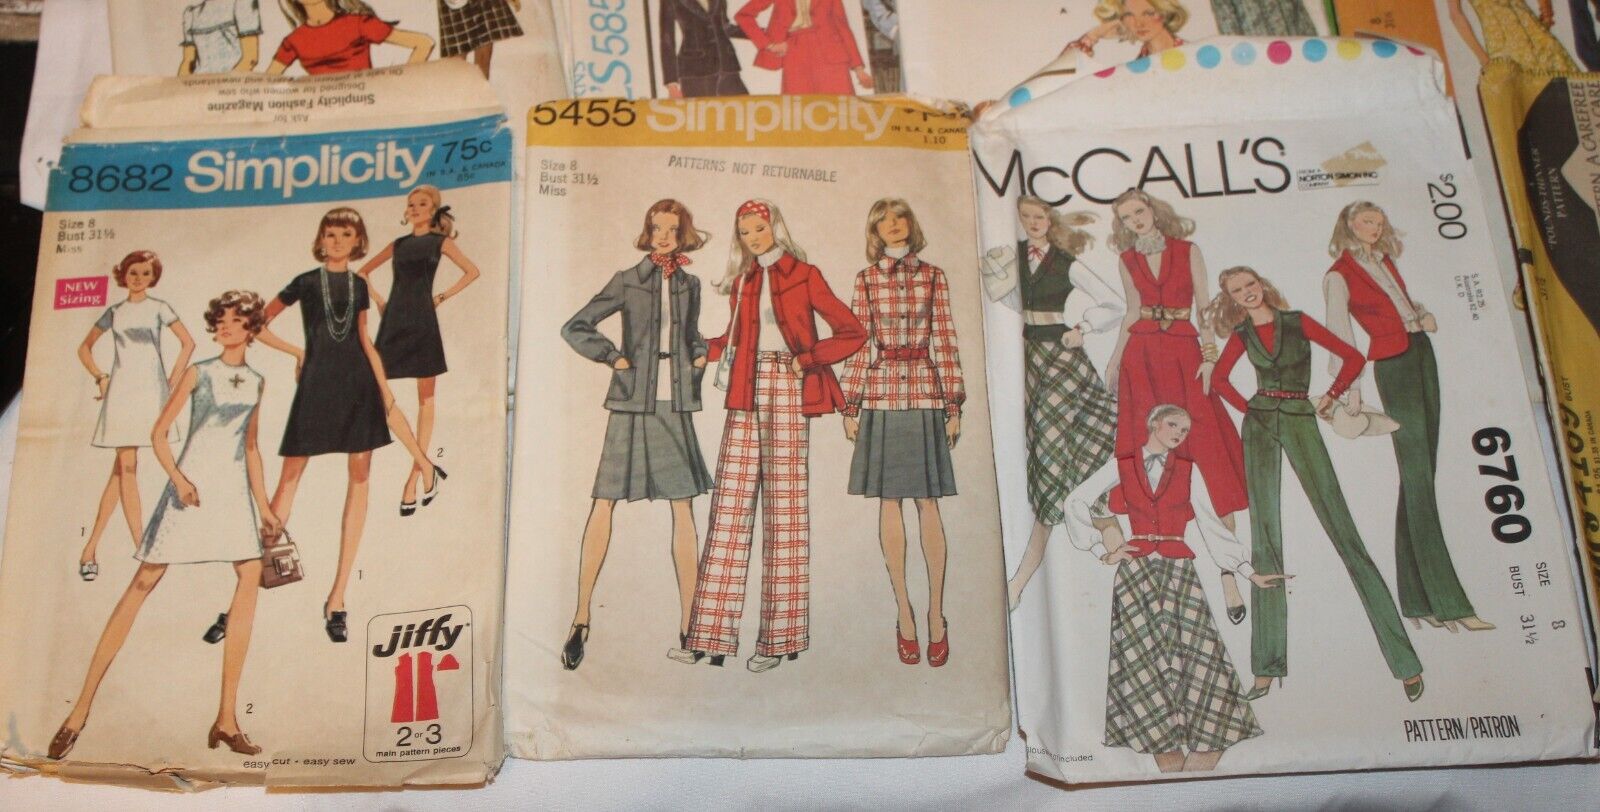 20 Vtg 1960\'s/70s Sewing Pattern Lot Women\'s Clothing SZ 8 McCalls Simplicity